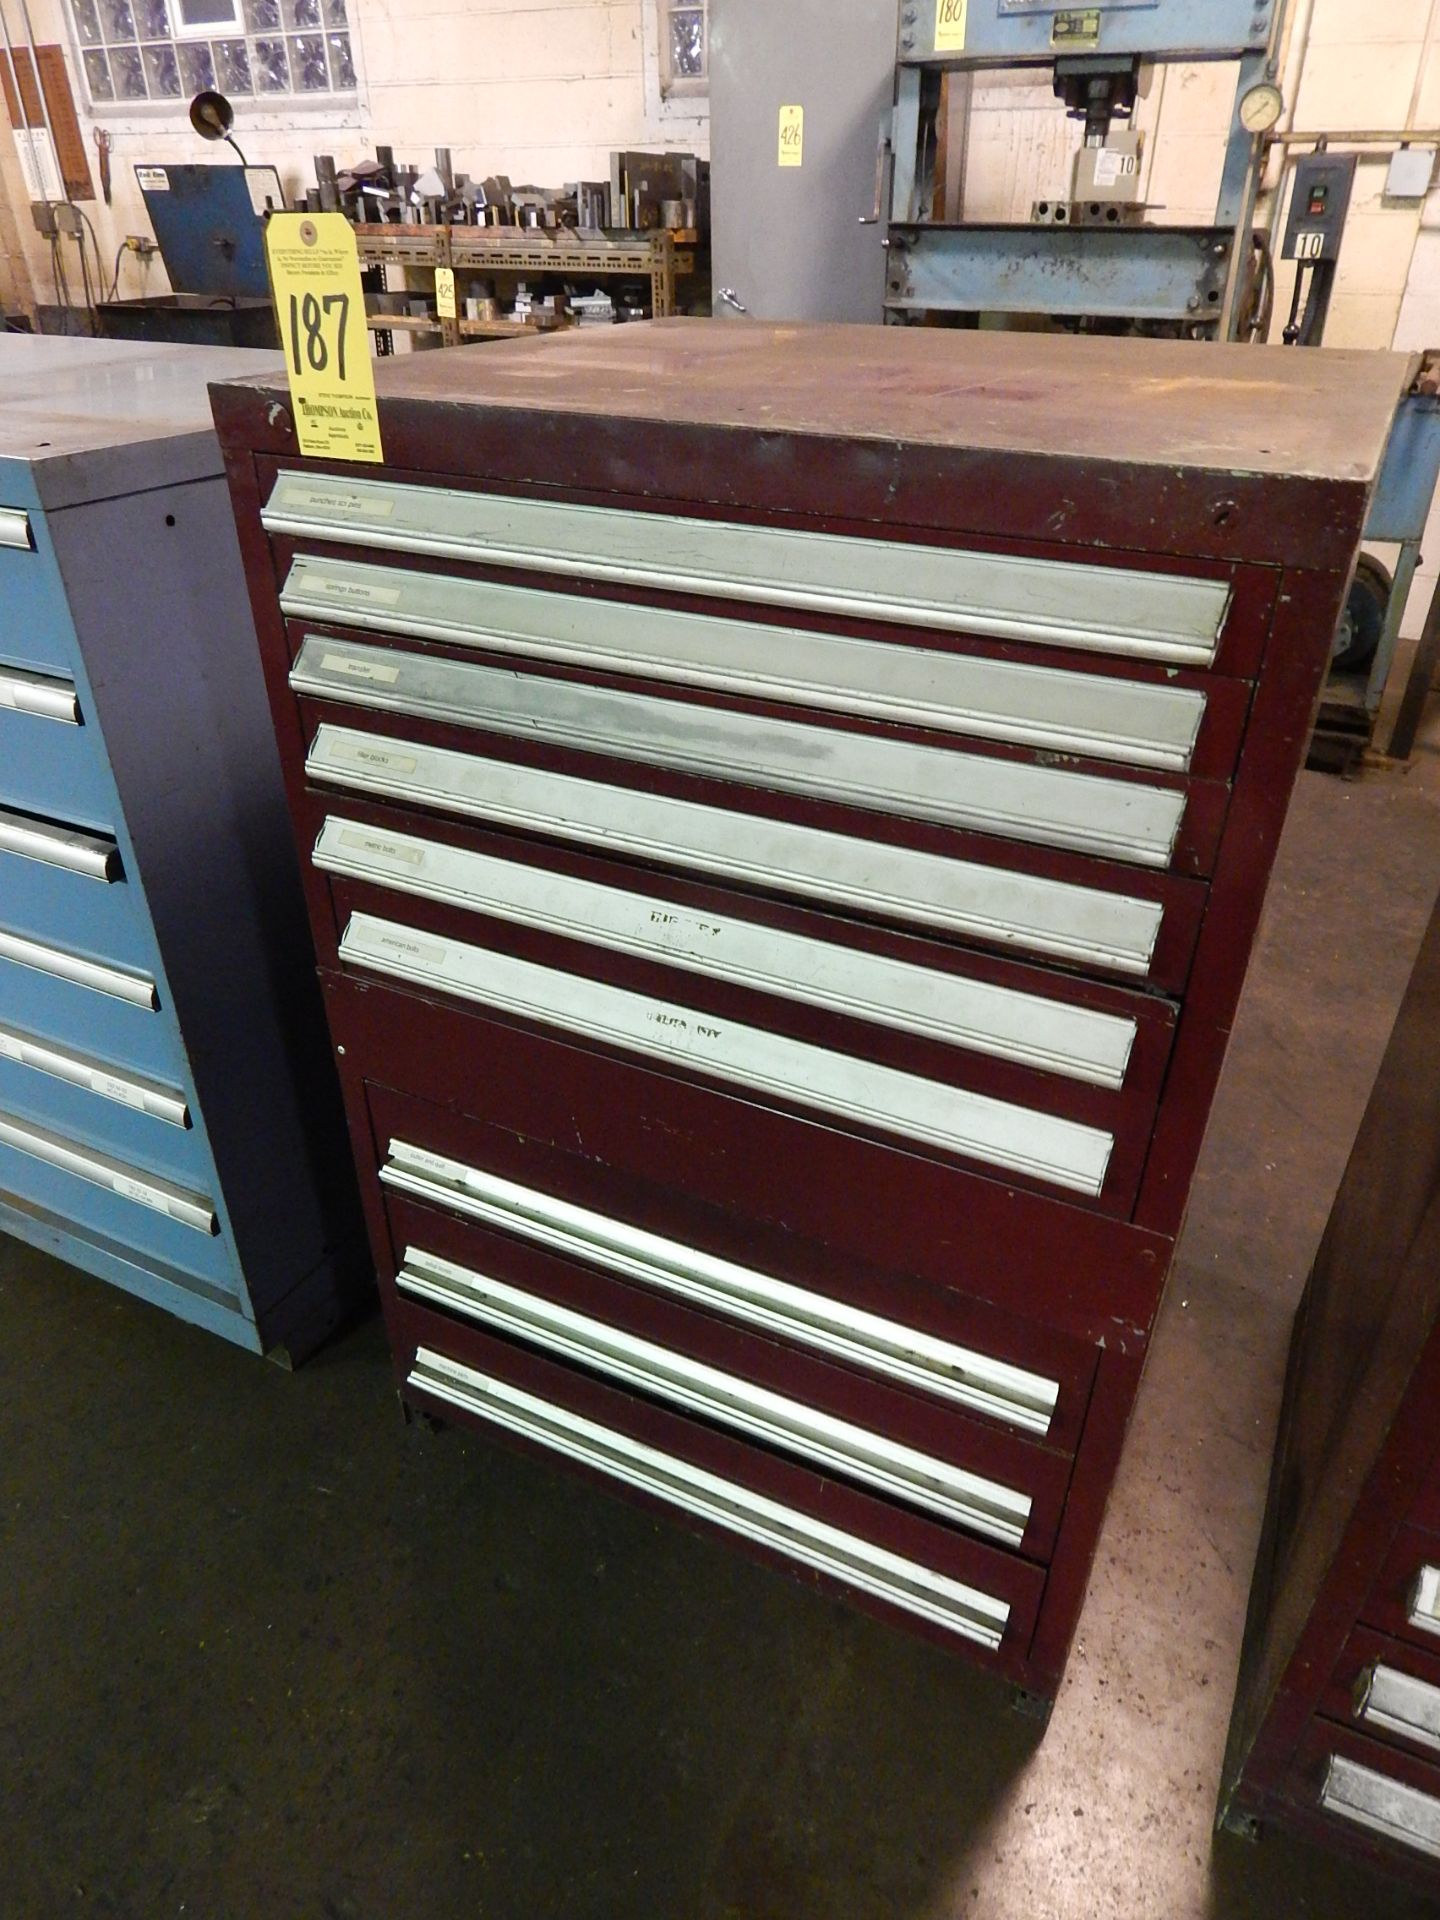 9 Drawer Tooling Cabinet, 44 1/2 In. Tall, 30 In. Wide, 27 3/4 In. Deep, Loading Fee $50.00 - Image 3 of 6